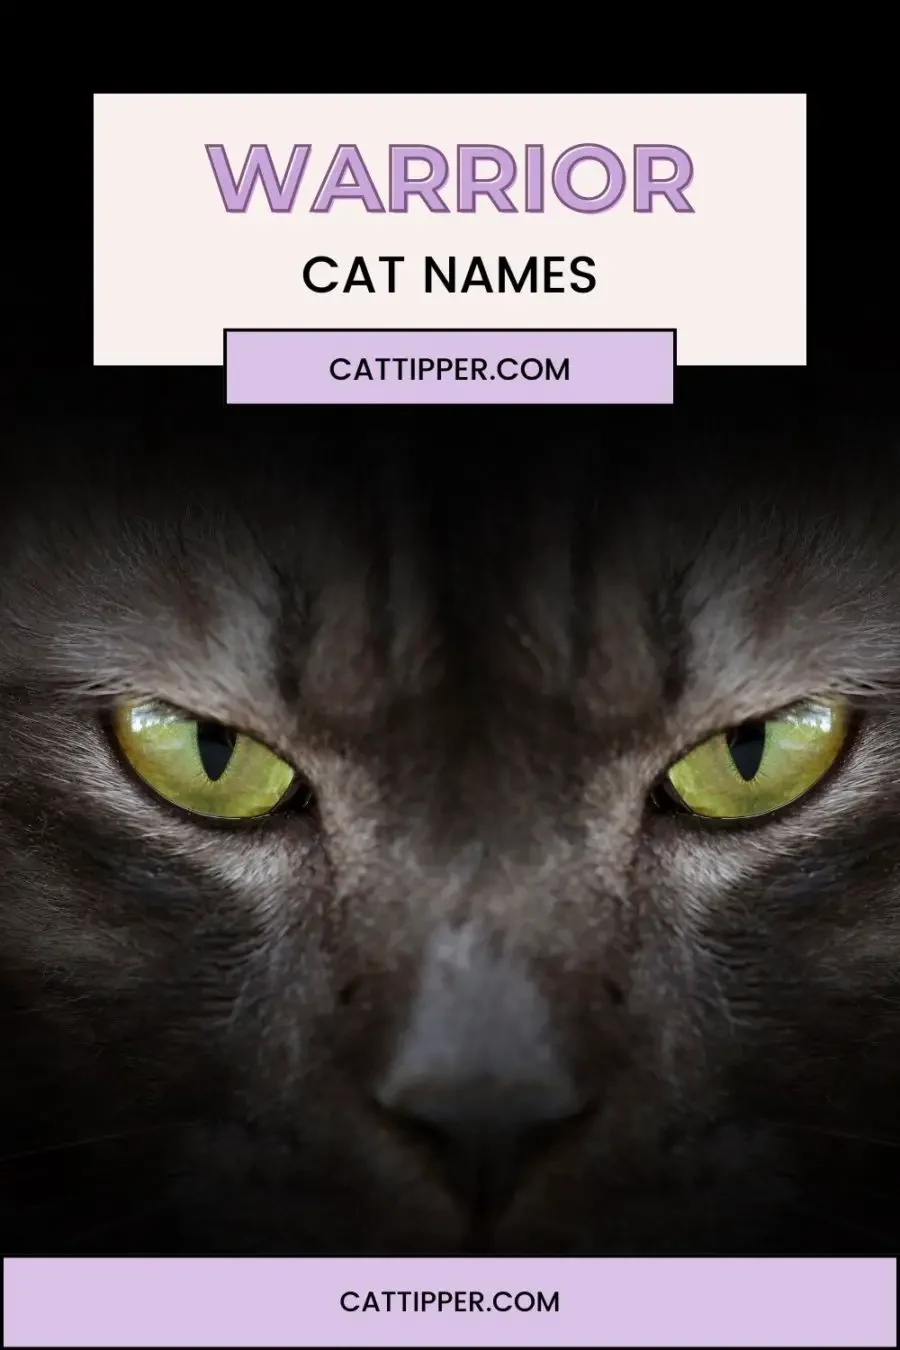 Warrior Cat Name Generator: Find Your Warrior's Name 